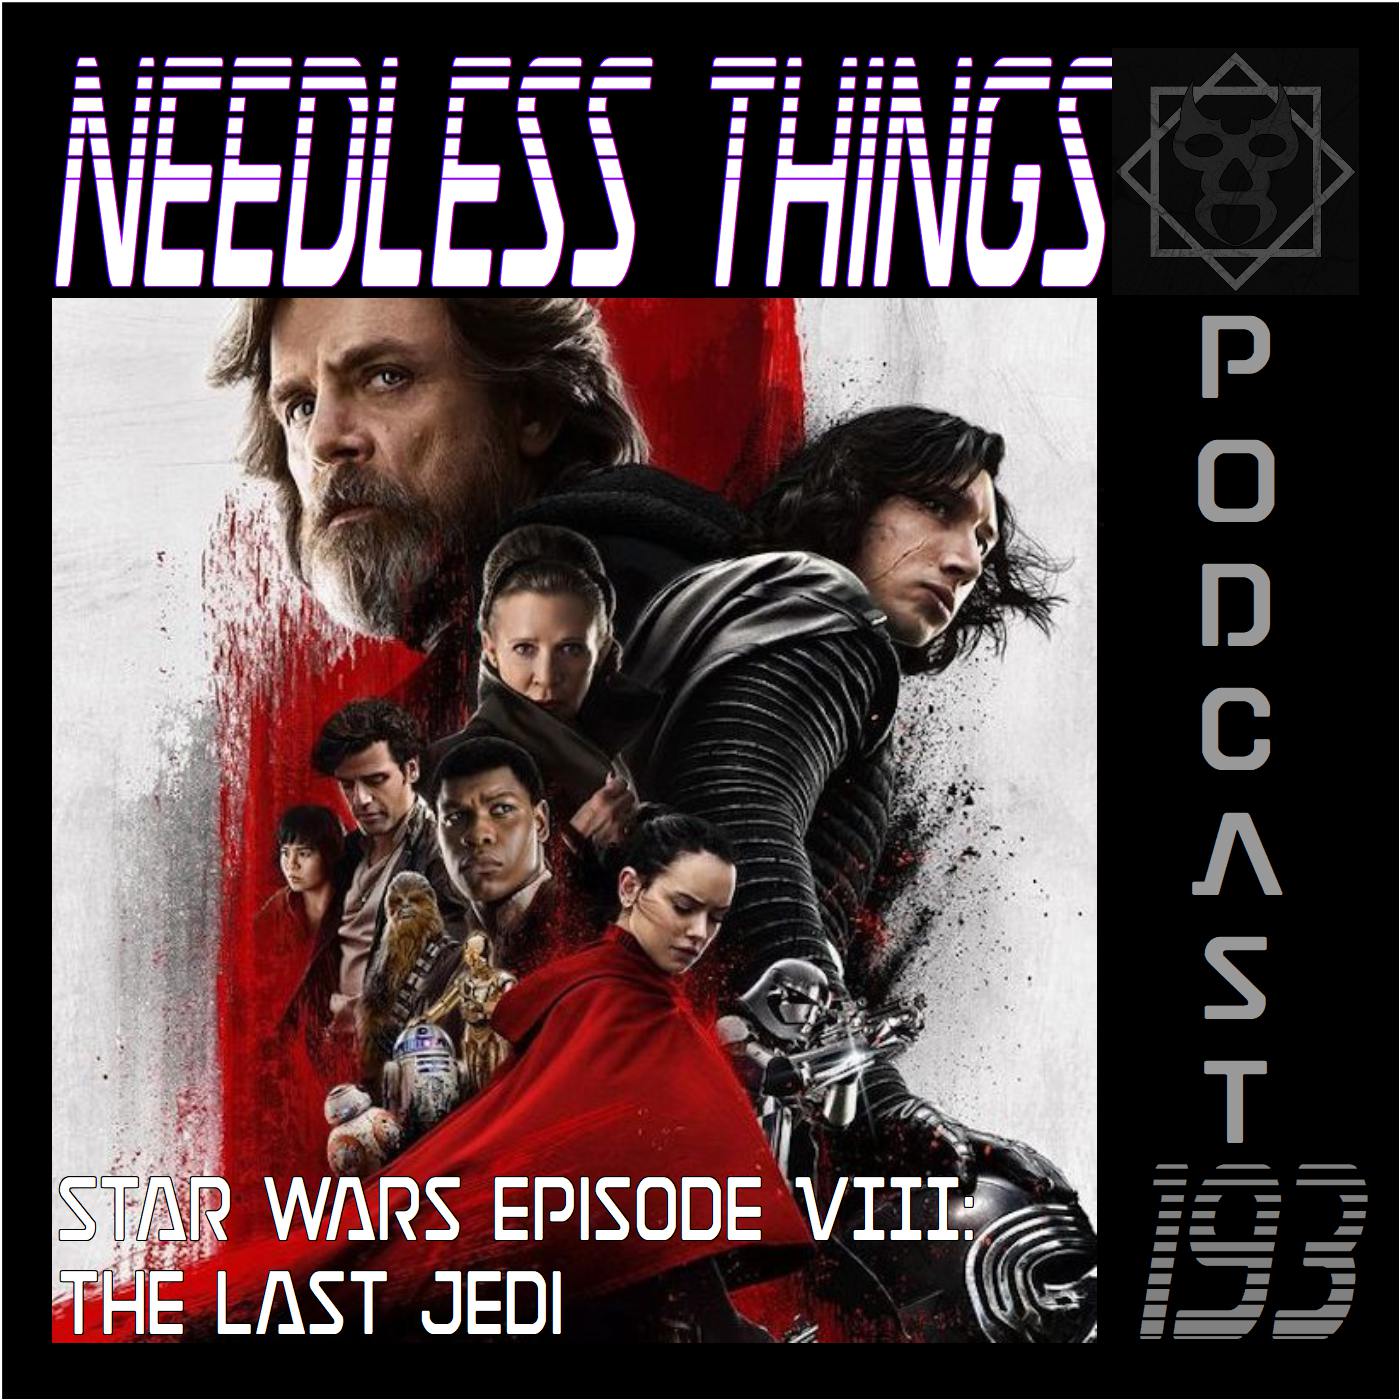 Needless Things Podcast 193 – Star Wars Episode VIII: The Last Jedi